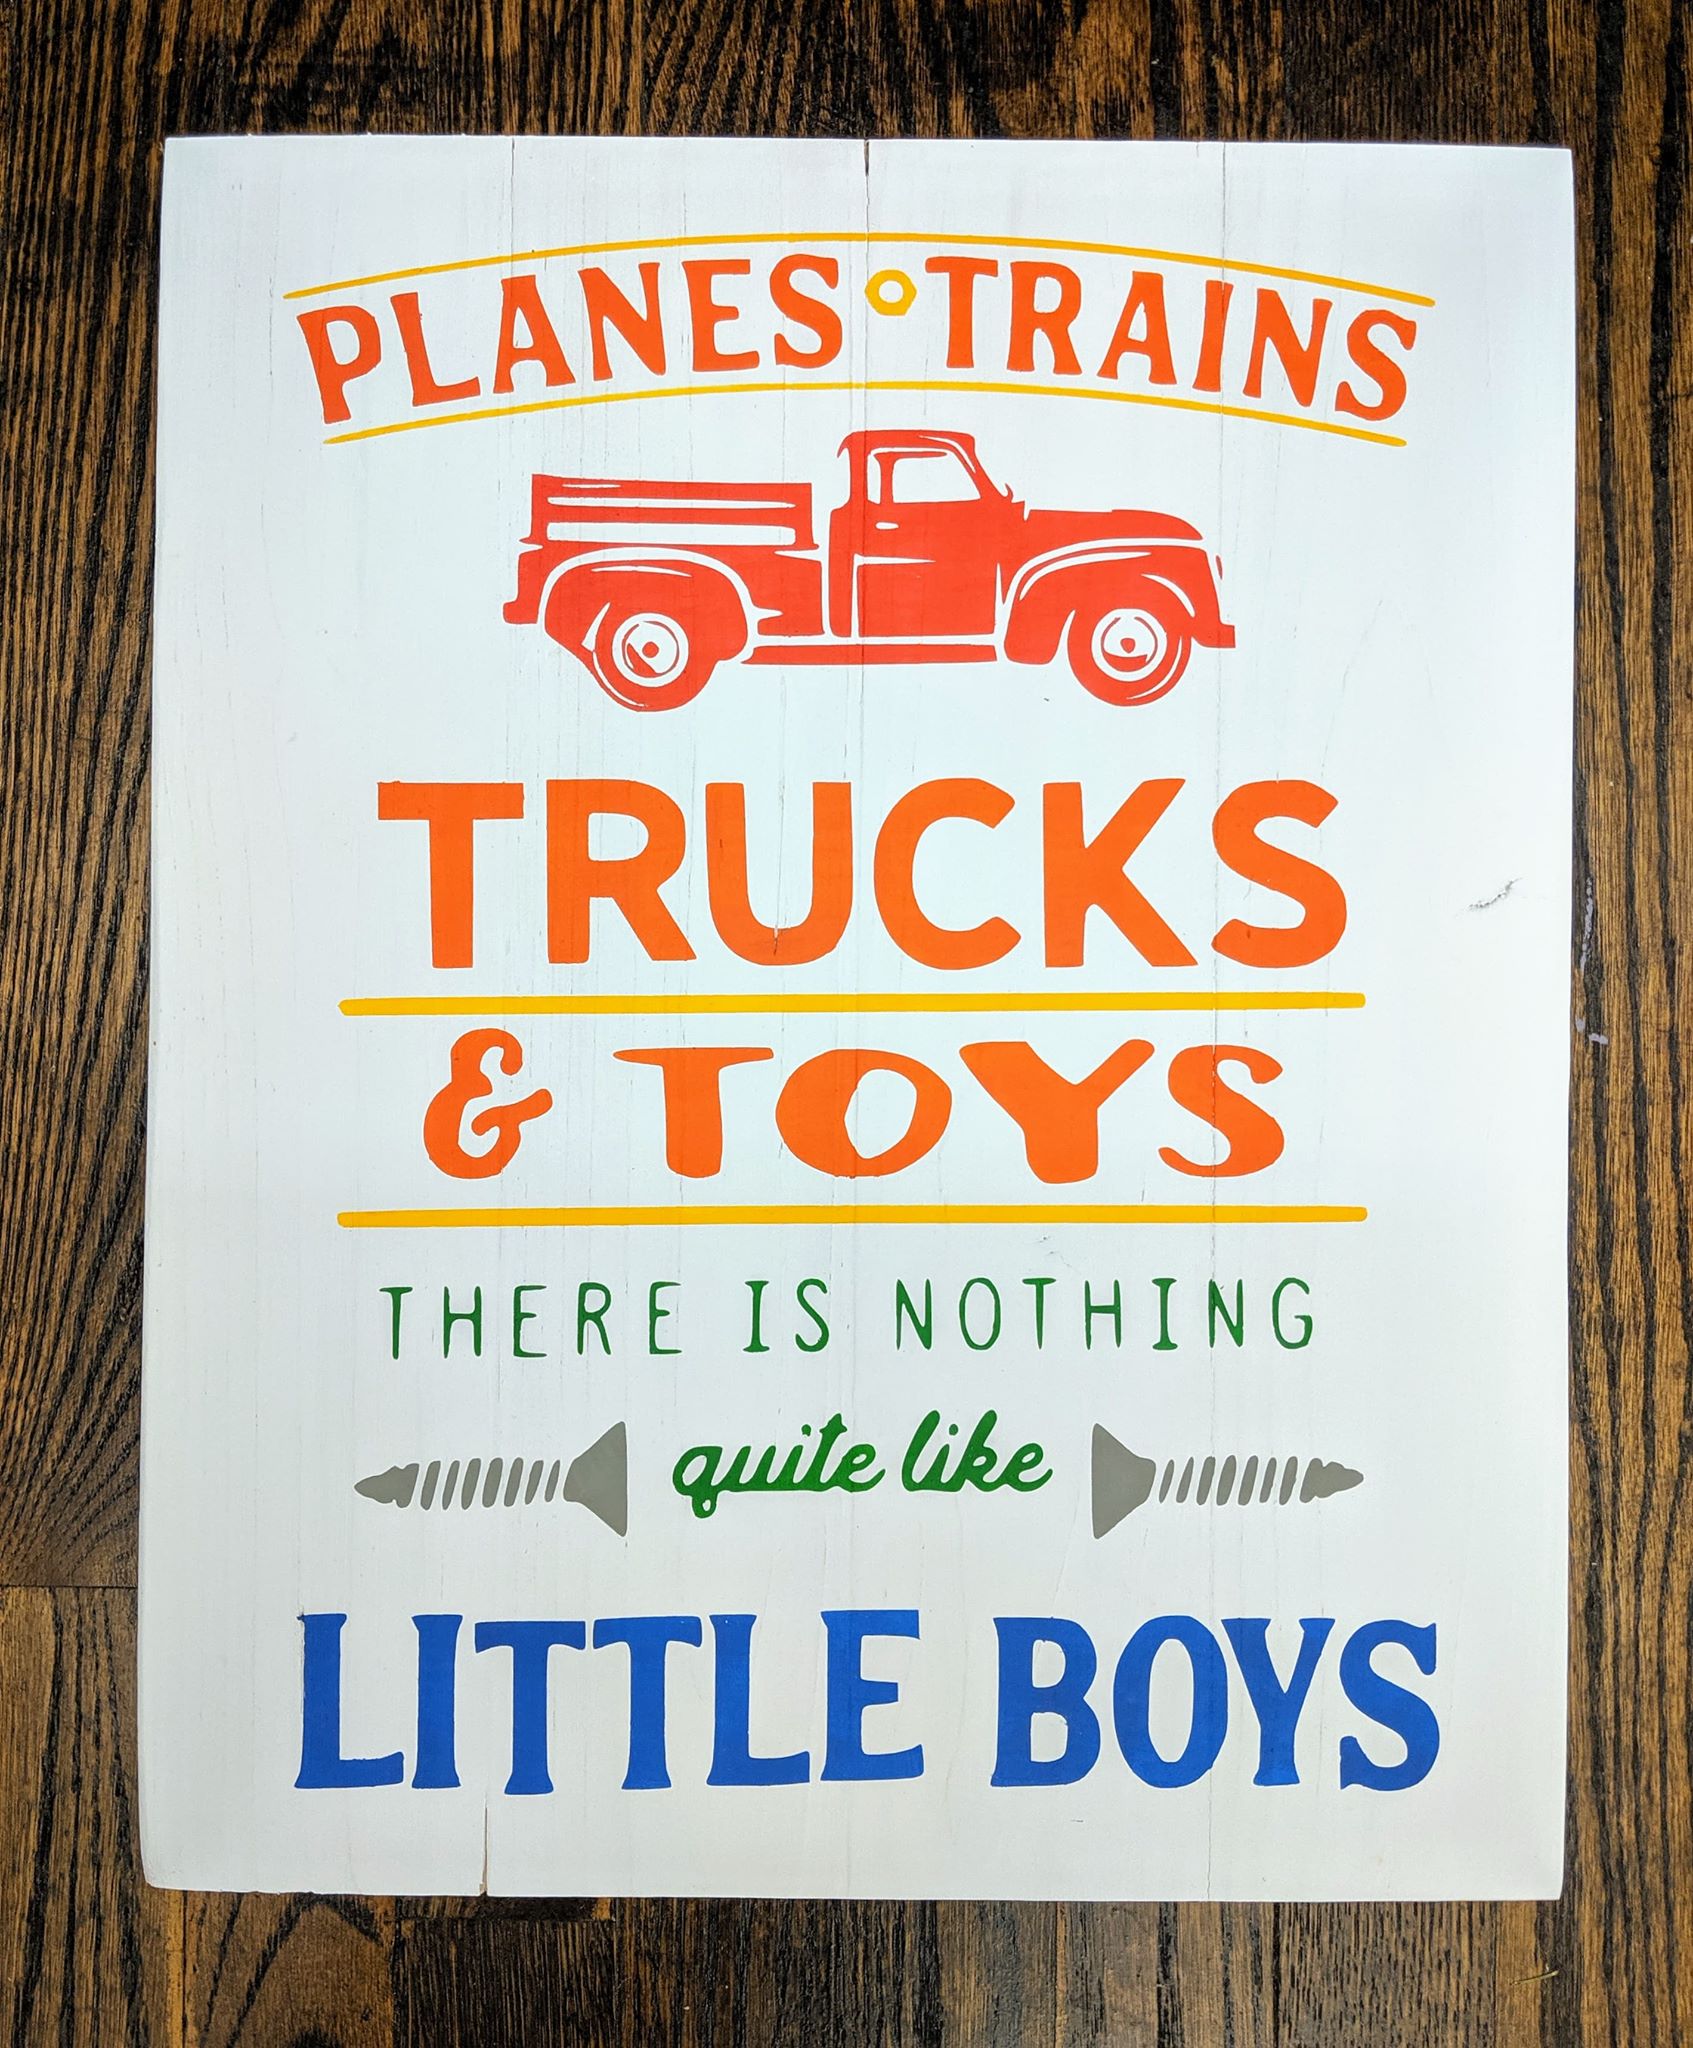 Planes trains trucks and toys